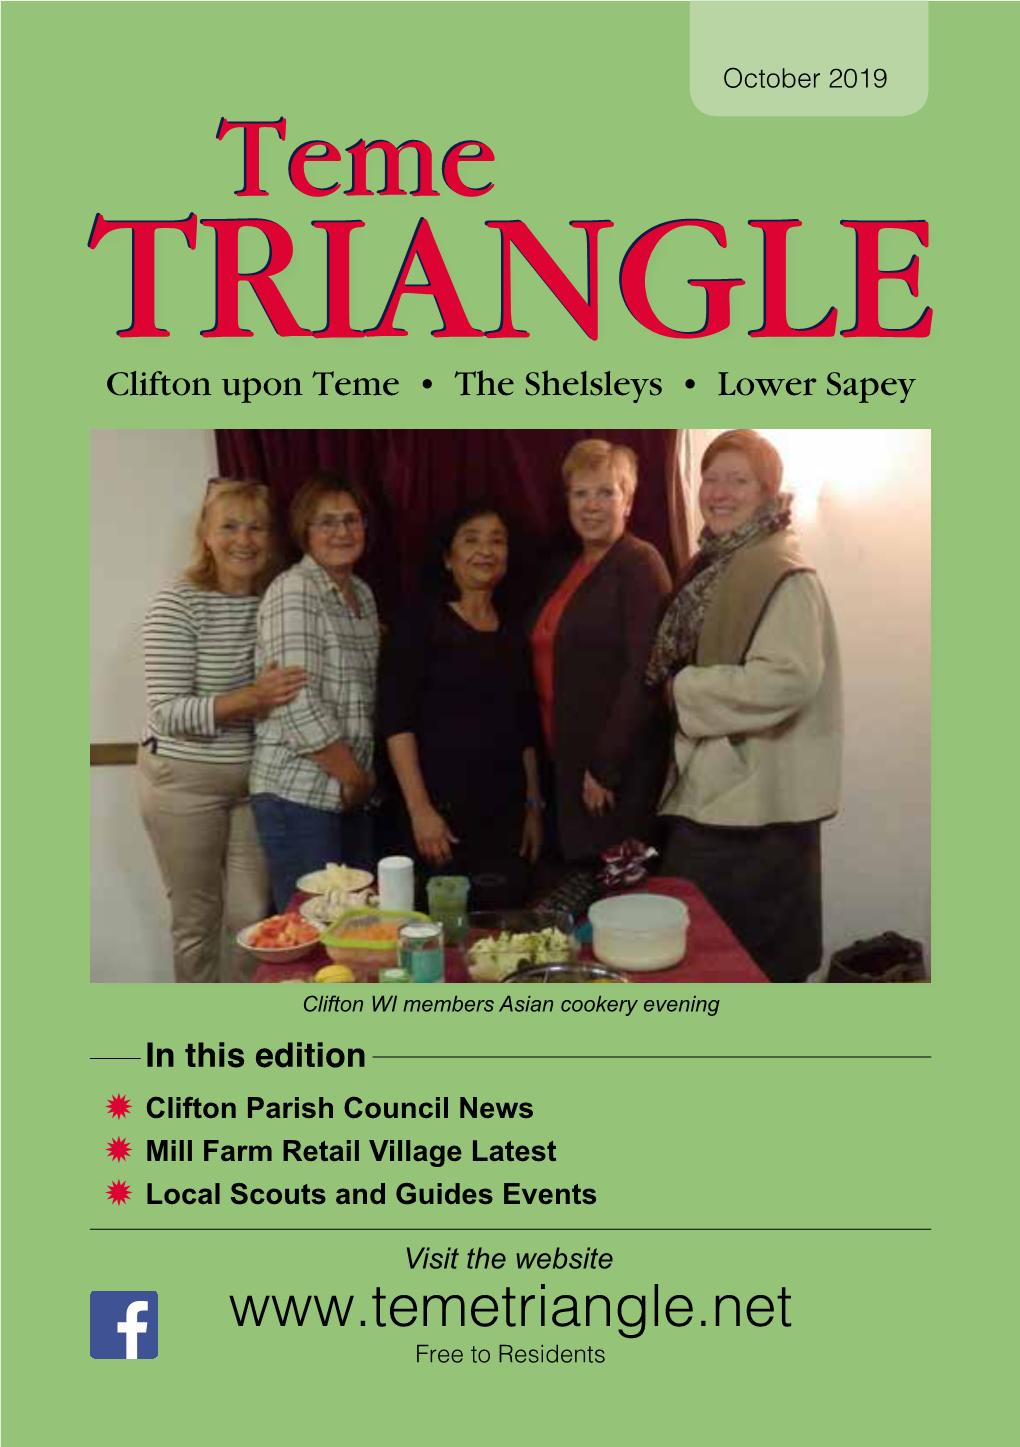 October 2019 Temeteme TRIANGLETRIANGLE Clifton Upon Teme • the Shelsleys • Lower Sapey